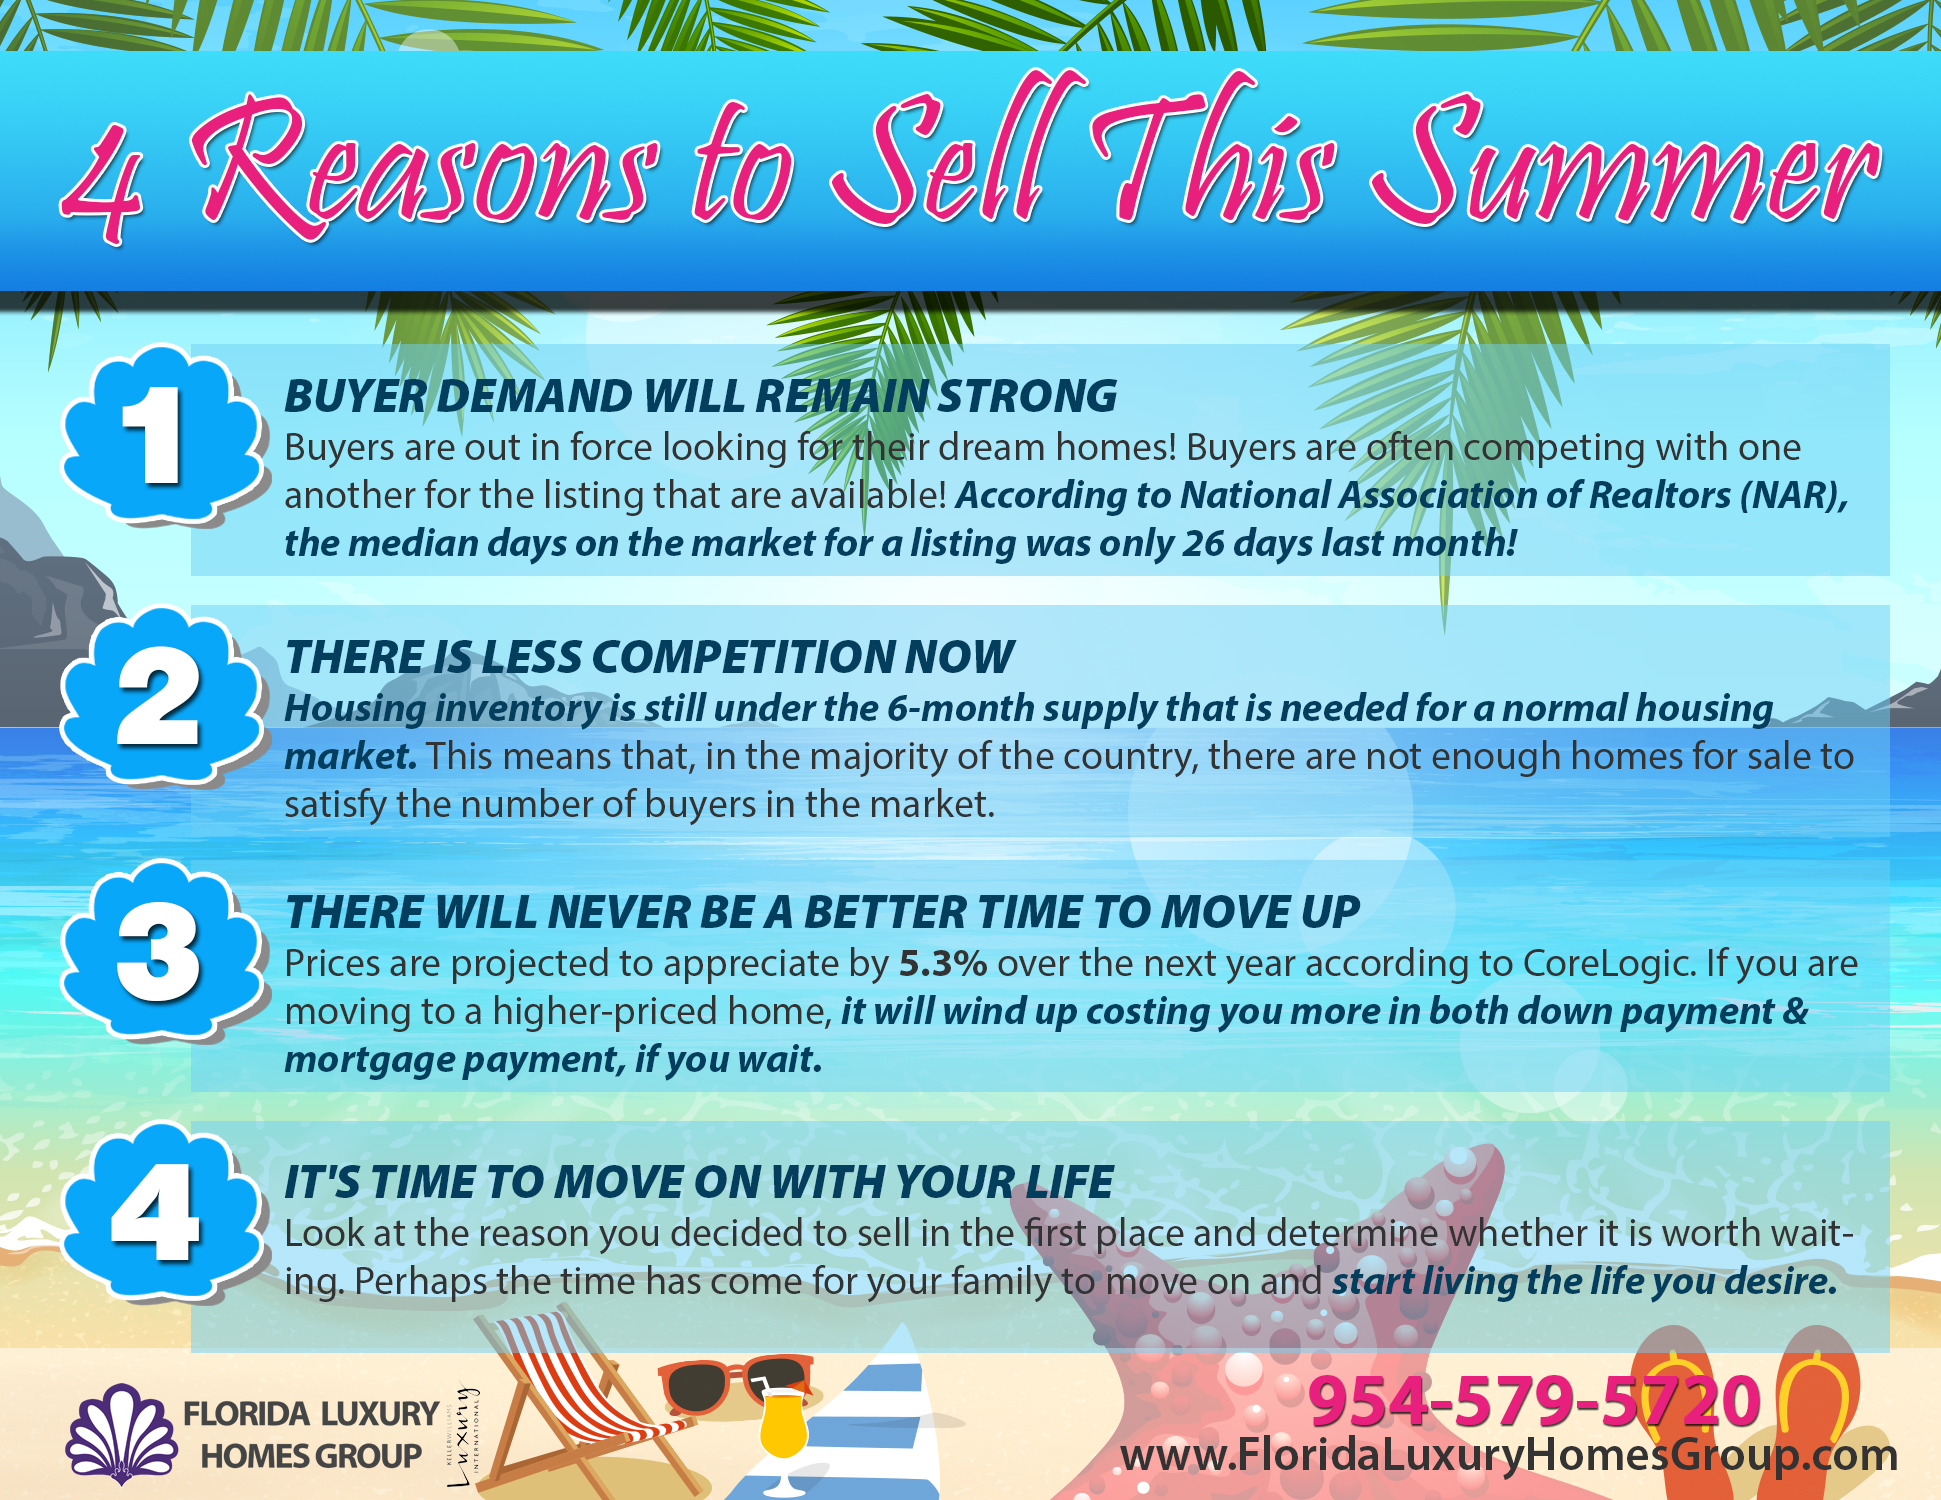 4 Big Reasons To Sell This Summer [Infographic]